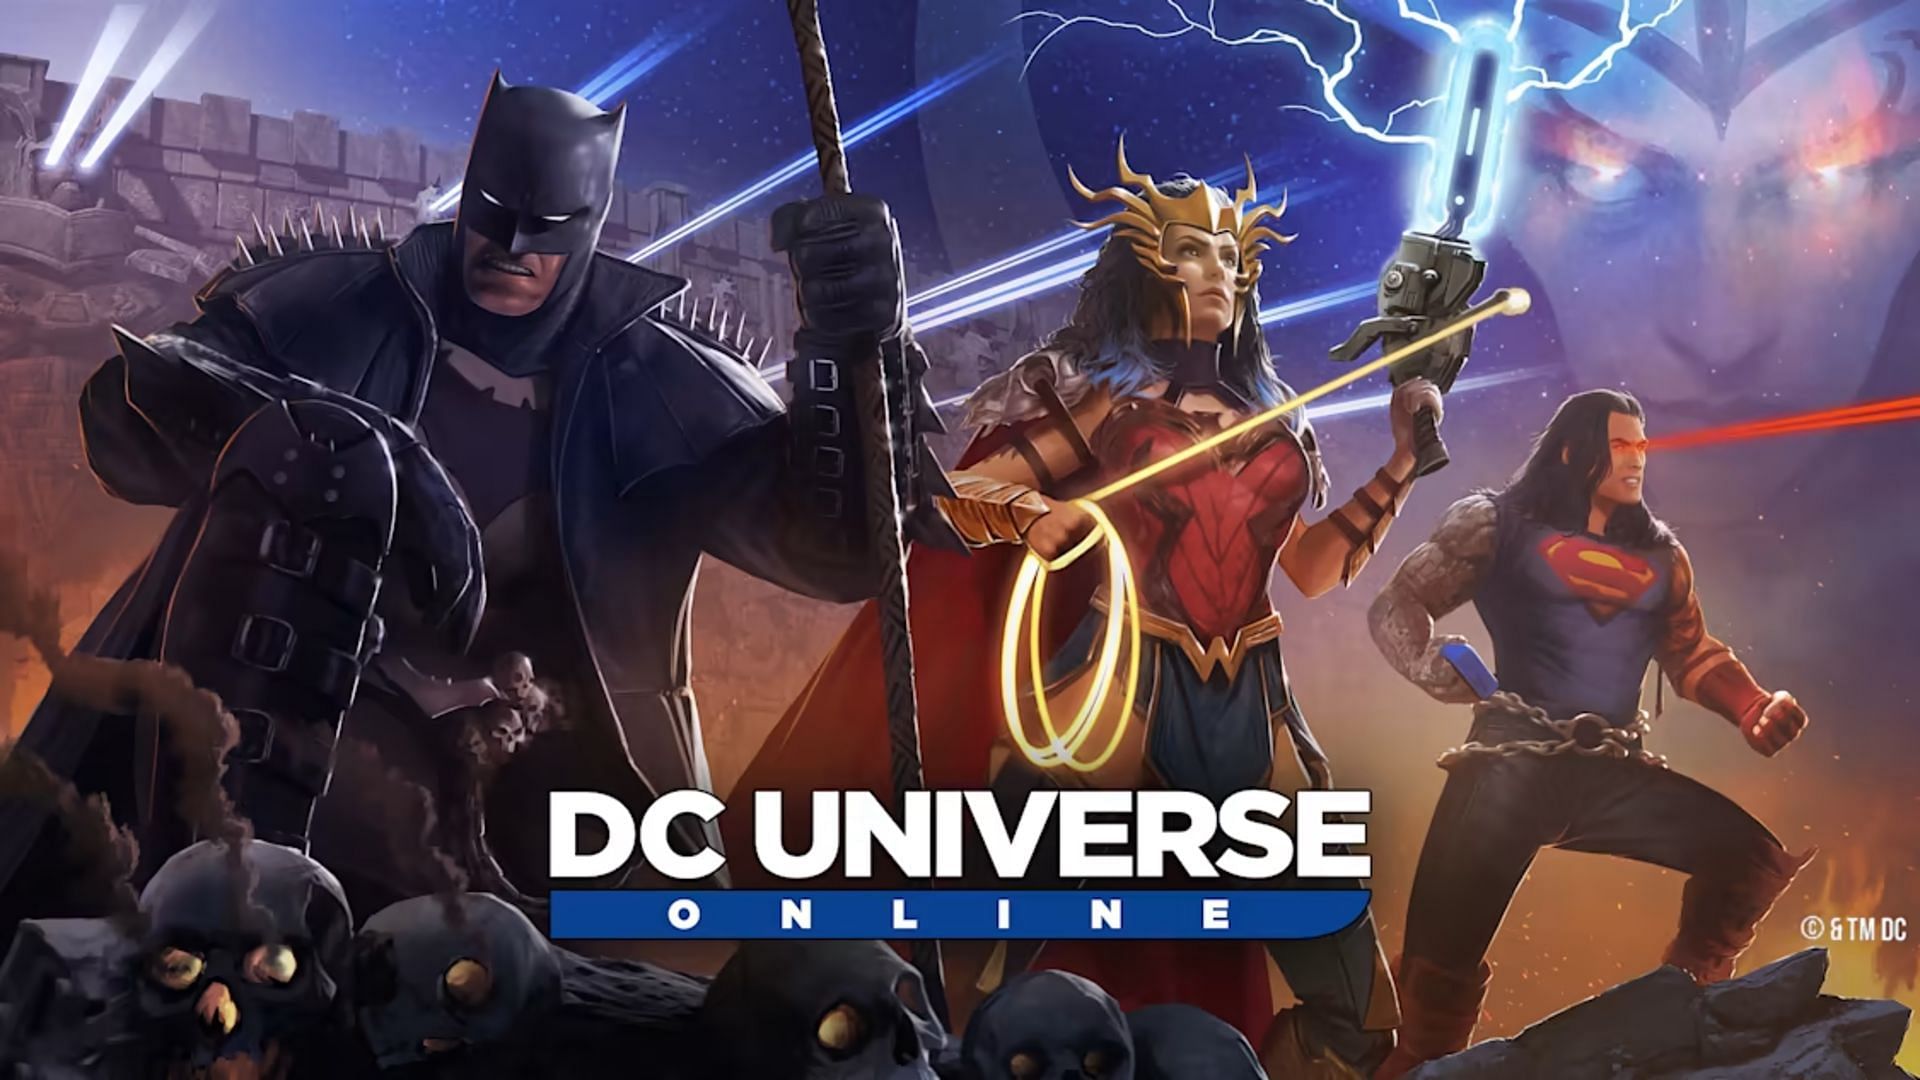 DC Universe Online features a variety of superheroes and villains (Image via DC)